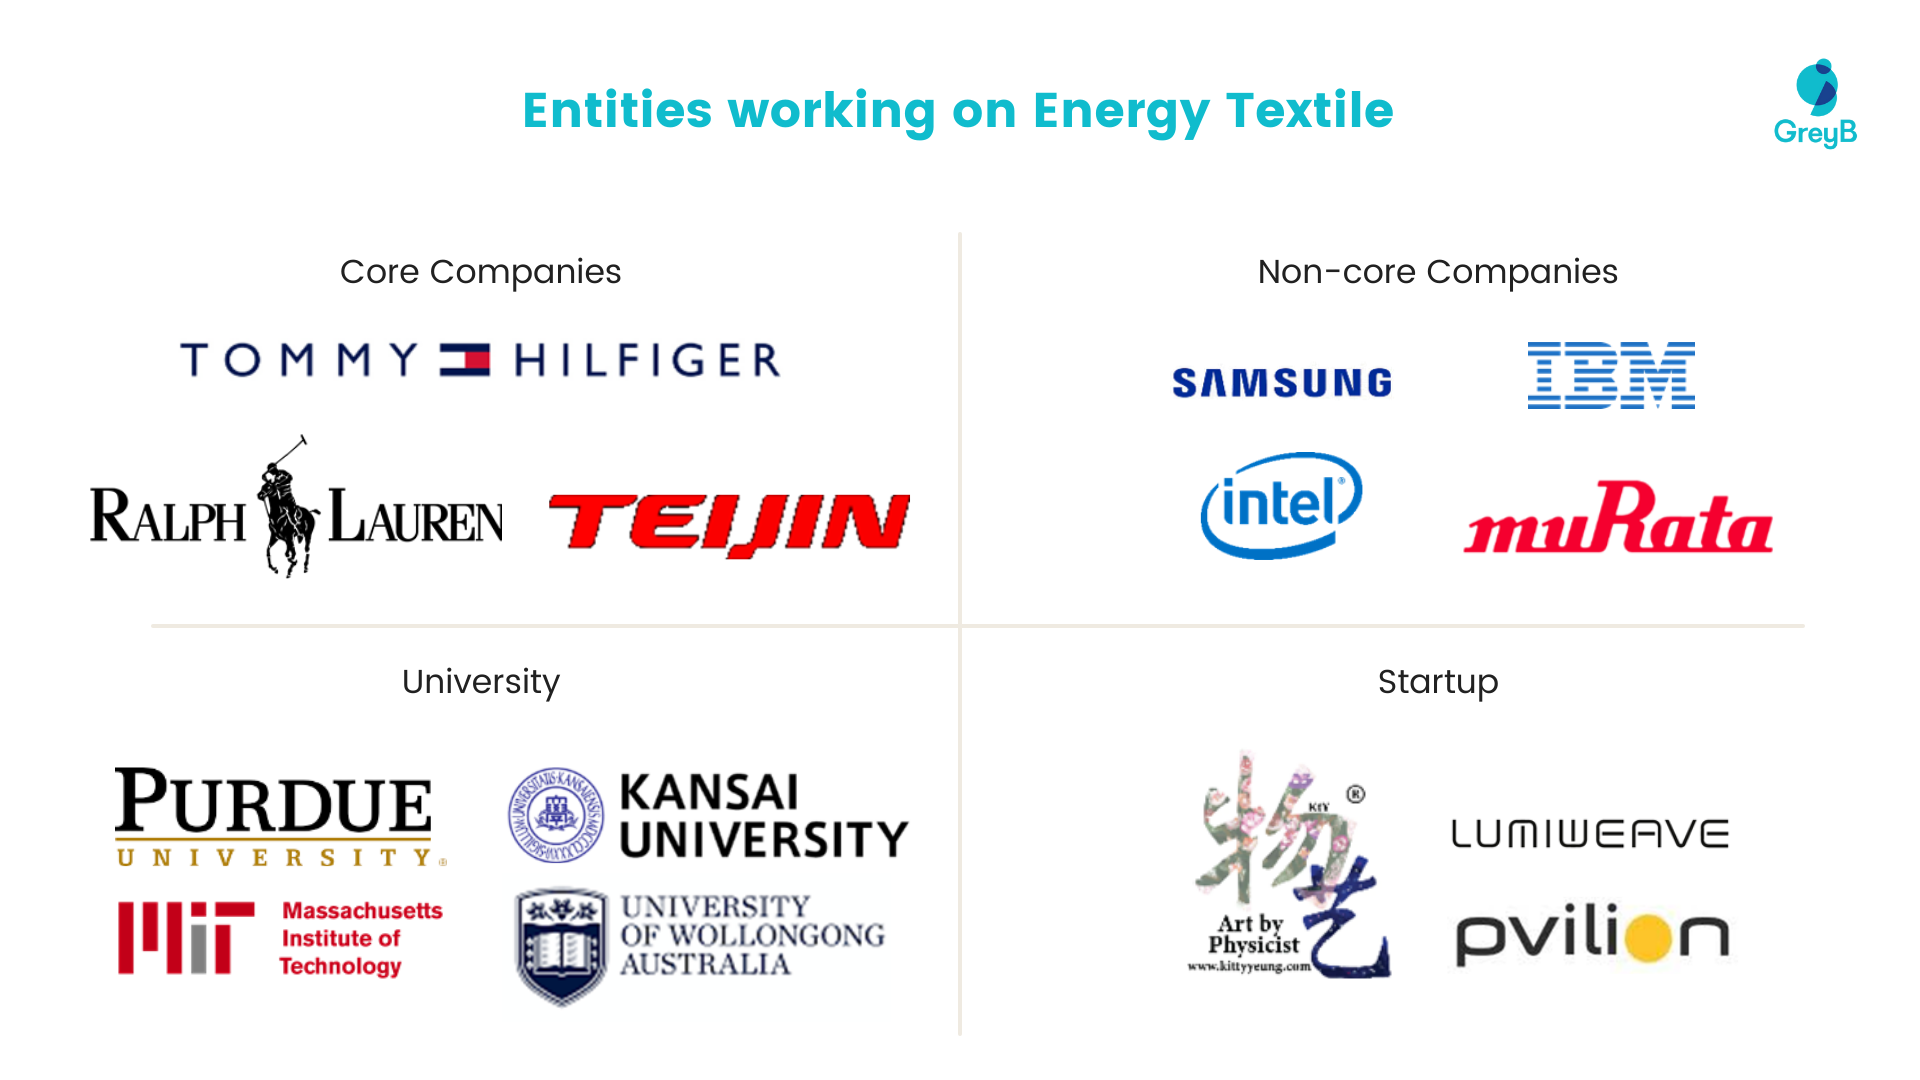 Entities working on Energy Textiles 